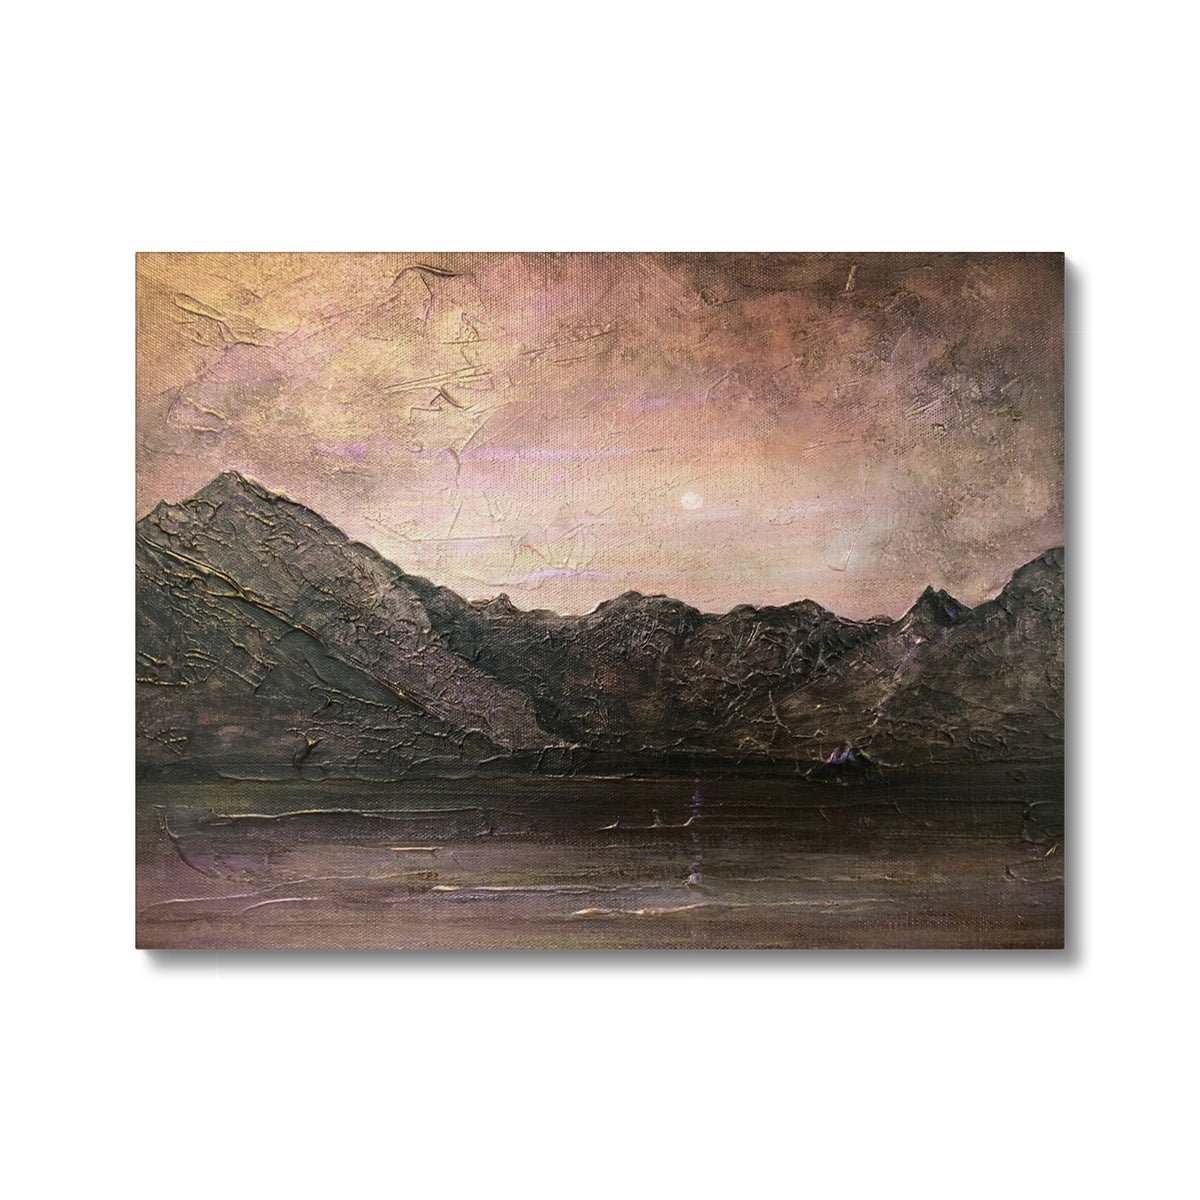 Dubh Ridge Moonlight Skye Painting | Canvas From Scotland-Contemporary Stretched Canvas Prints-Skye Art Gallery-24"x18"-Paintings, Prints, Homeware, Art Gifts From Scotland By Scottish Artist Kevin Hunter